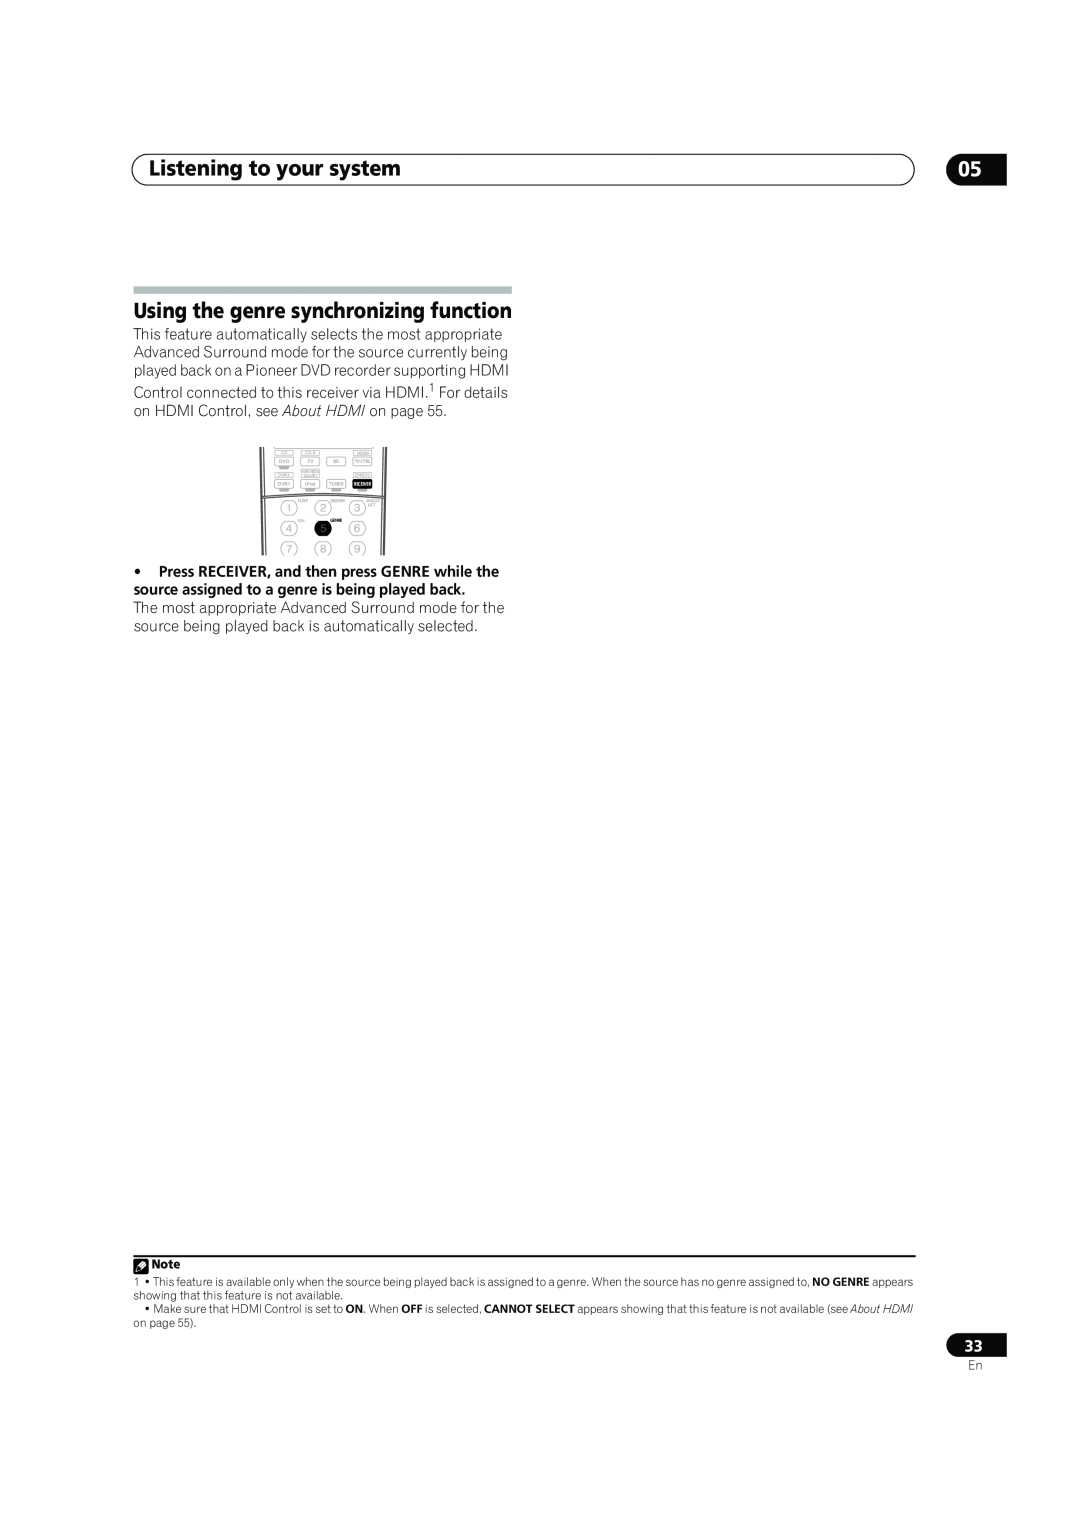 Pioneer VSX-LX60 operating instructions Using the genre synchronizing function, Listening to your system 